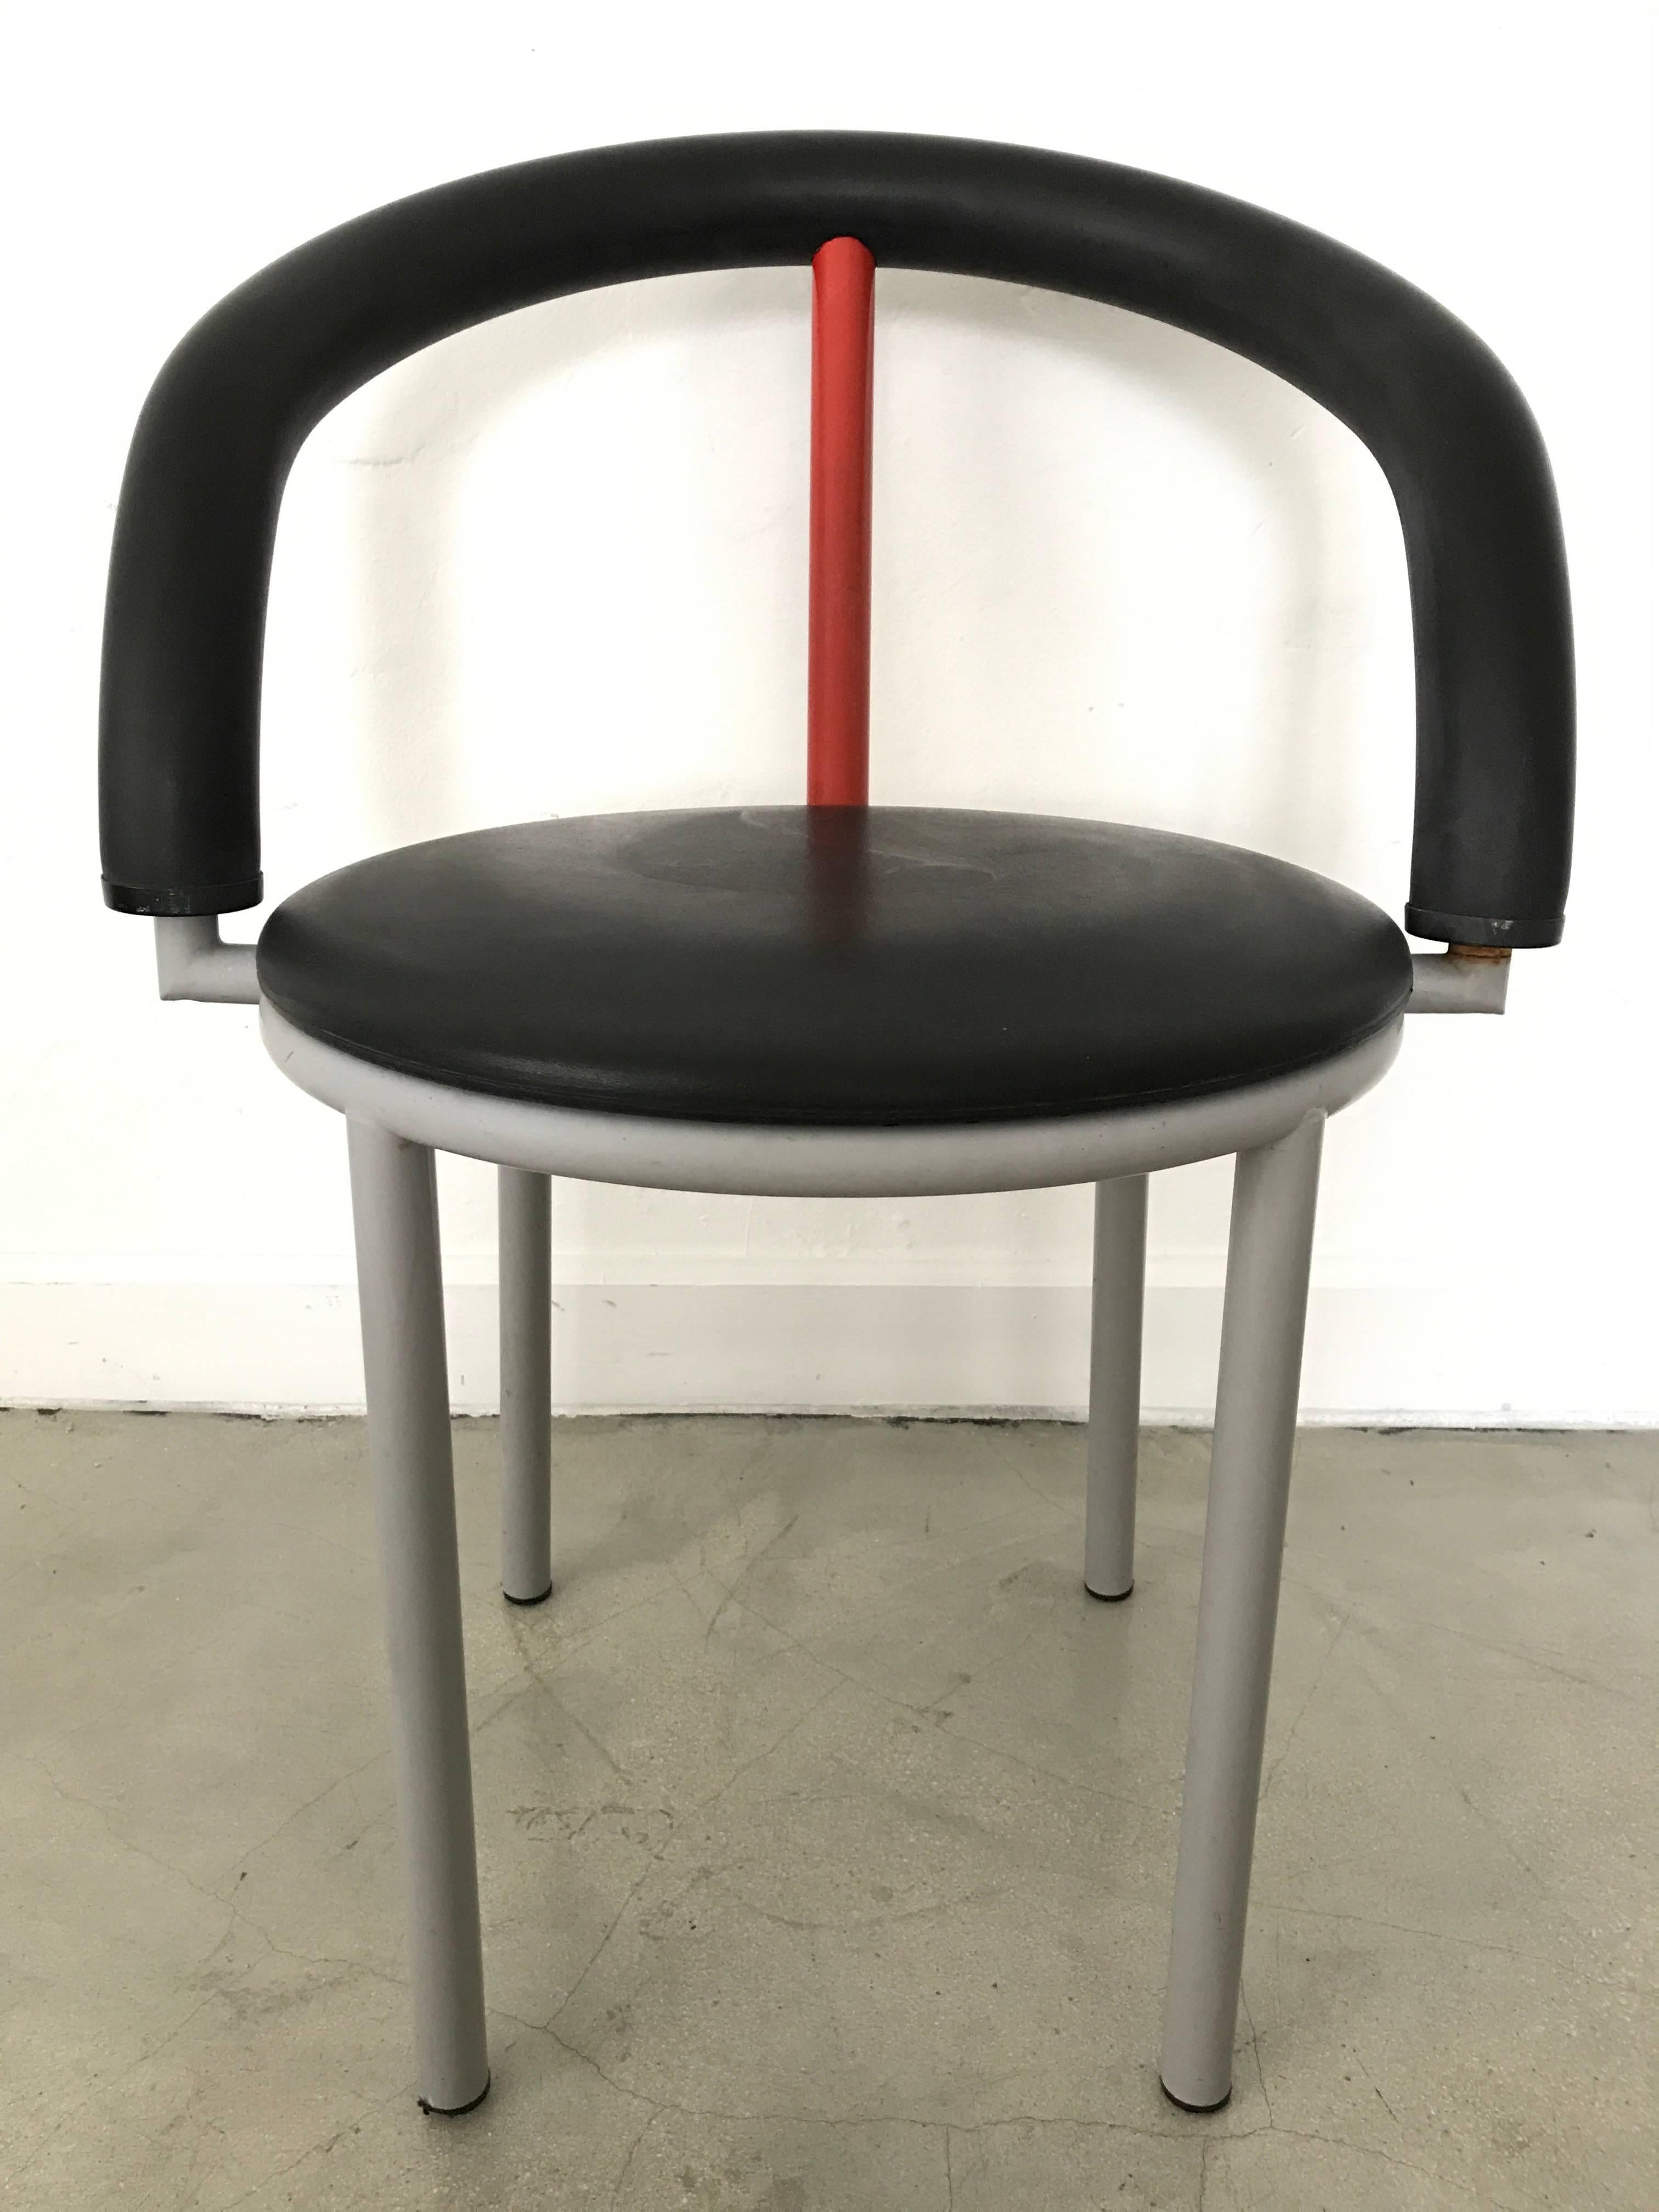 Postmodern grey steel frame chairs with black rubber seat back and black cushion by Anna Anselmi for Bieffeplast, 1985.